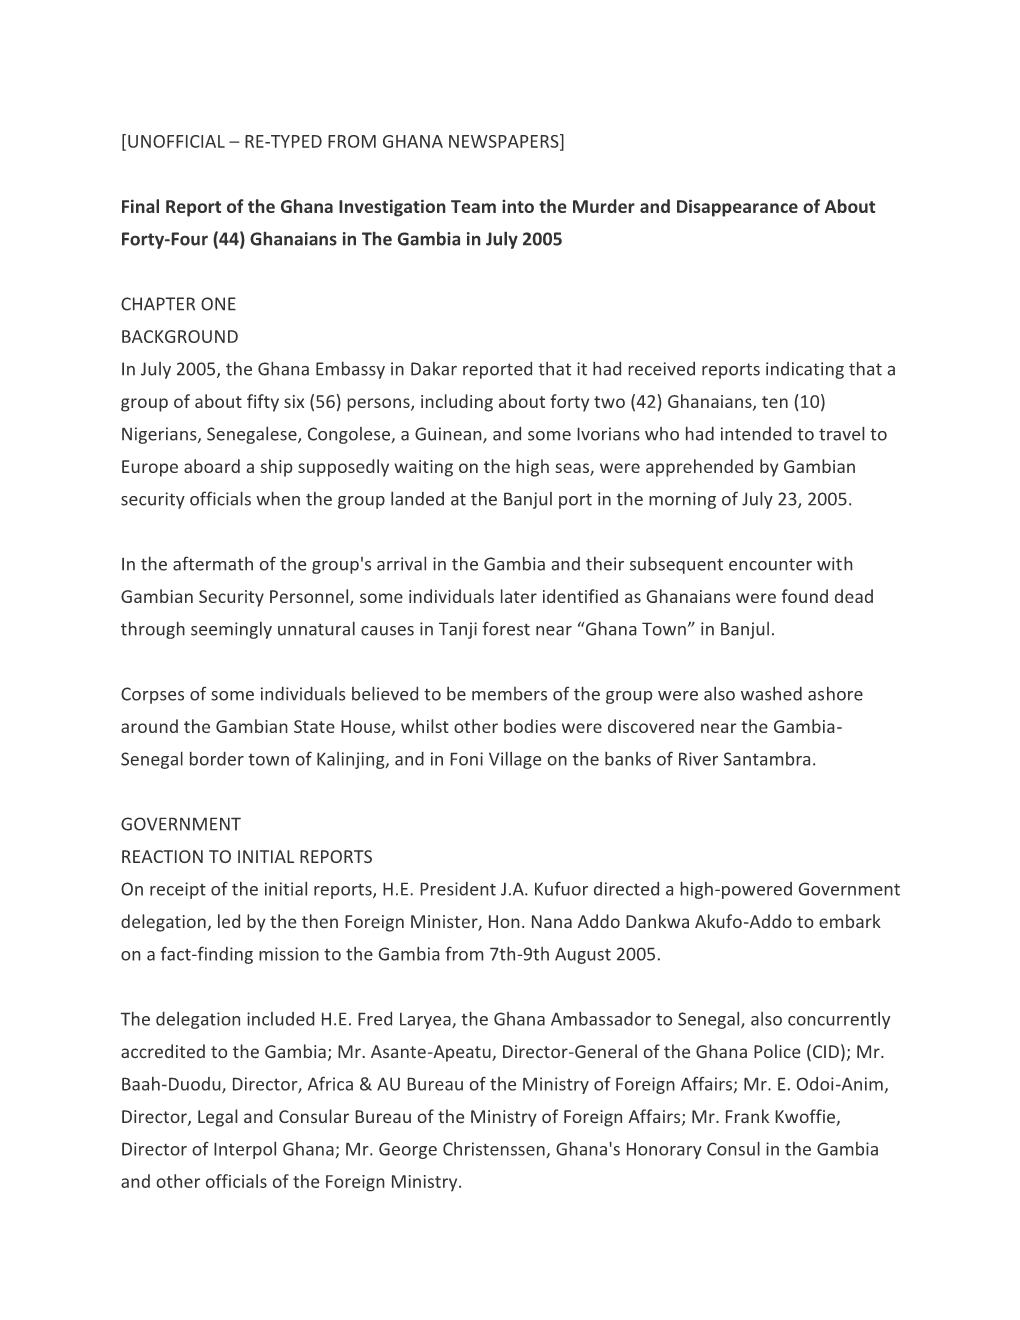 Final Report of the Ghana Investigation Team Into the Murder and Disappearance of About Forty-Four (44) Ghanaians in the Gambia in July 2005